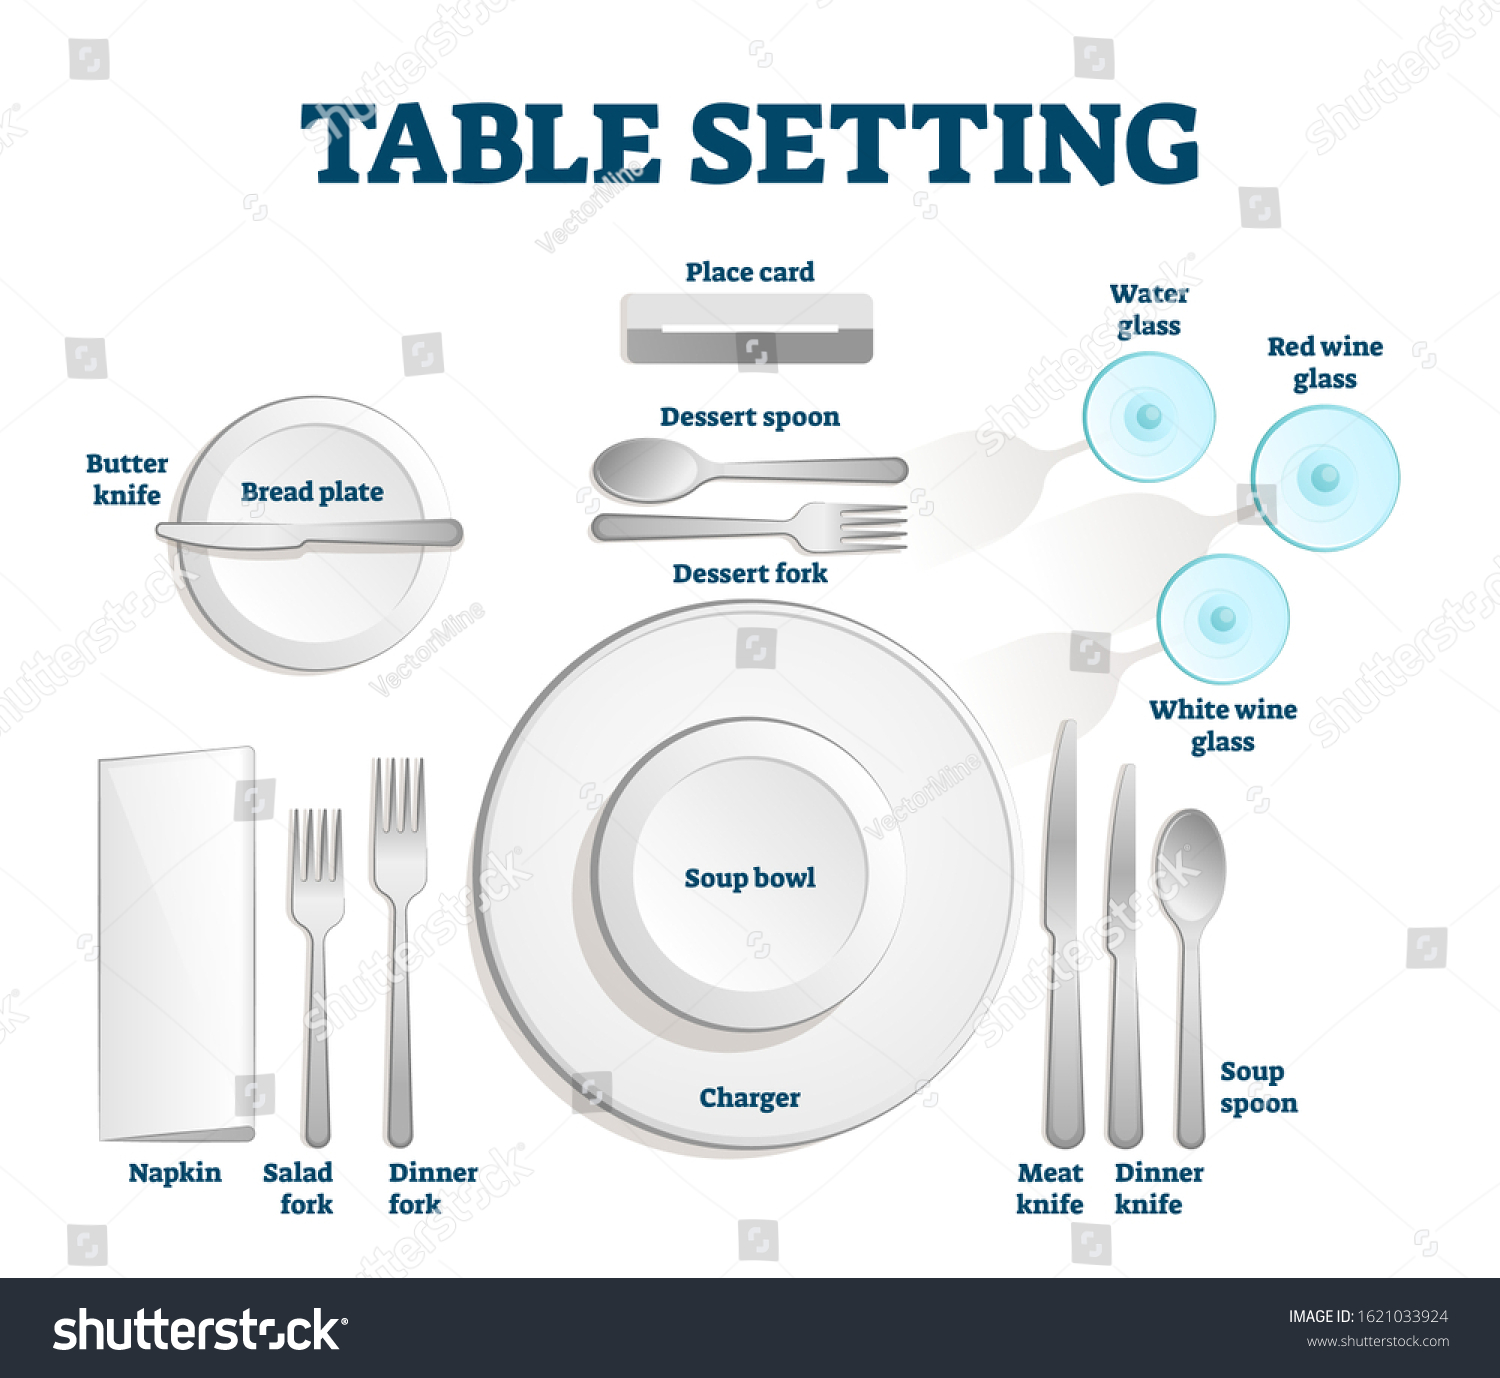 Table Setting Scheme Place Card Dessert Stock Vector (Royalty Free ...